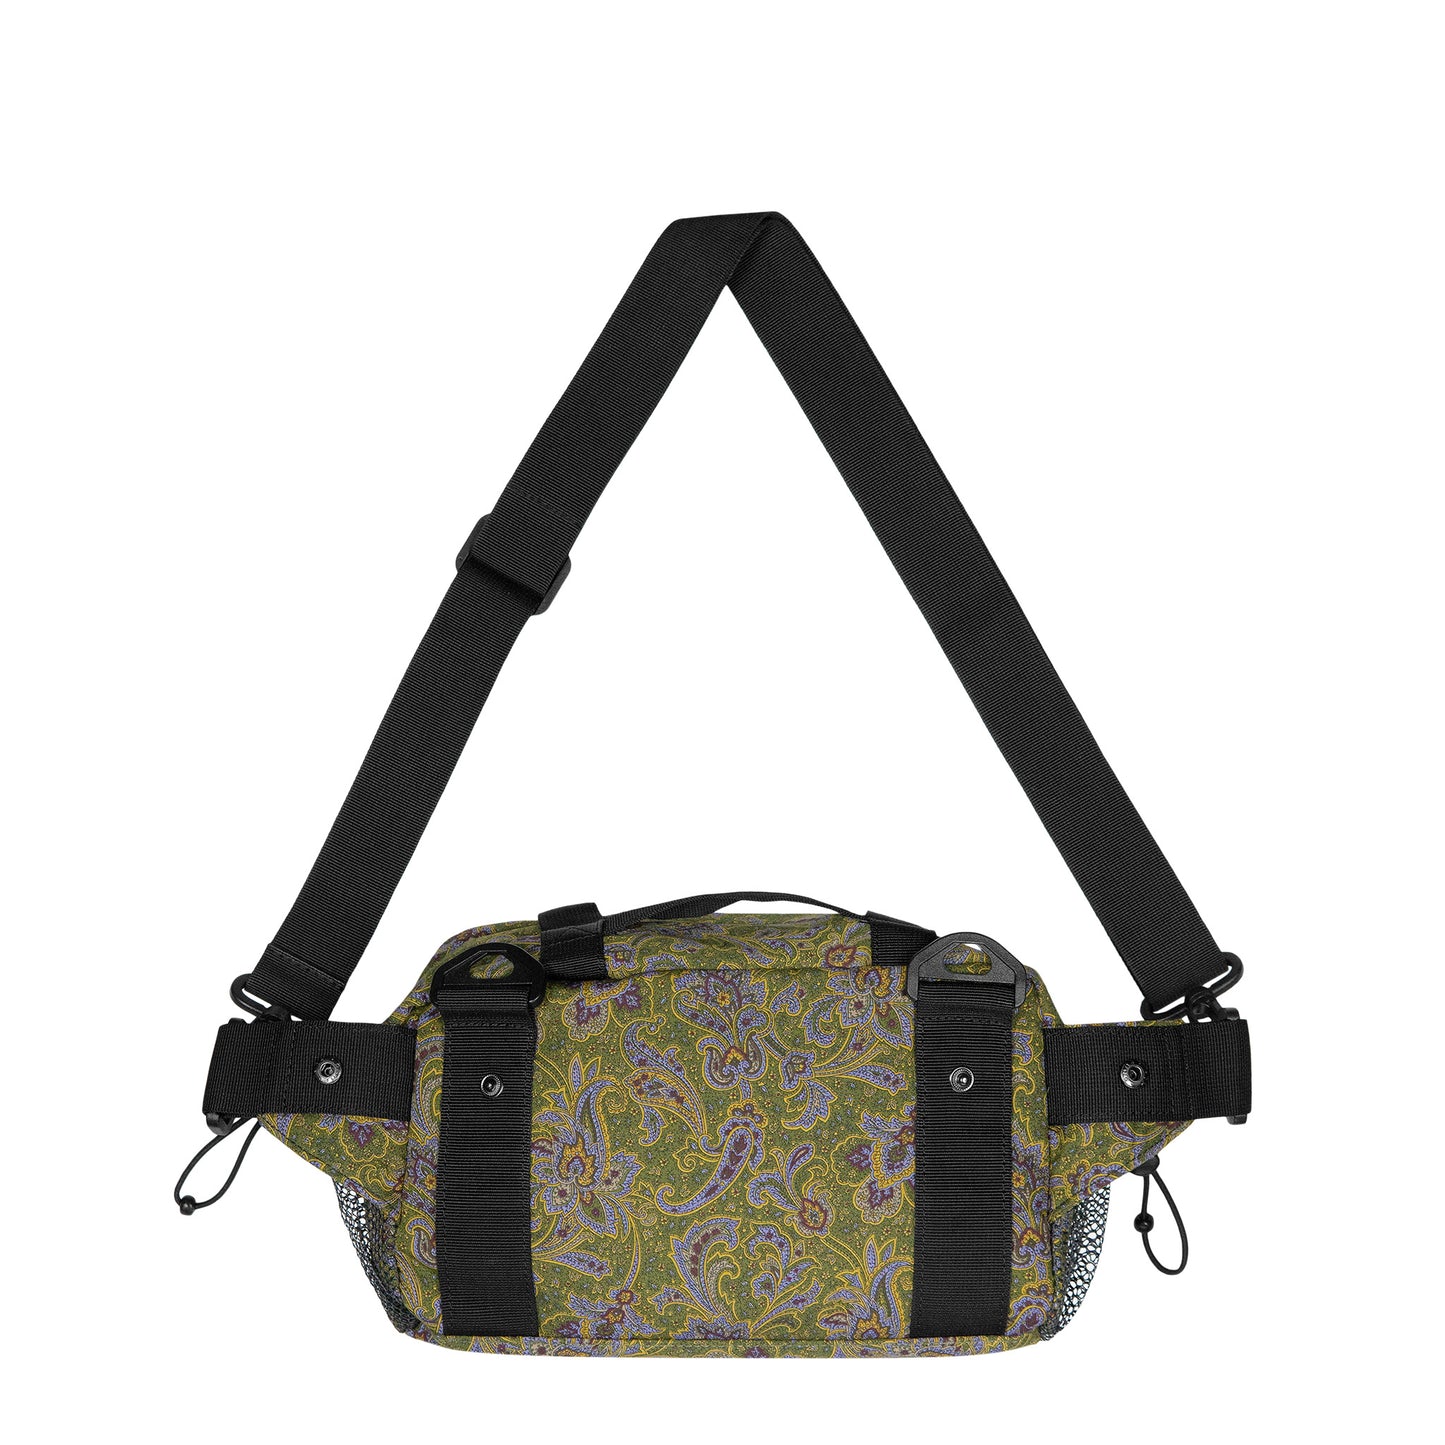 Load image into Gallery viewer, Two-Way Shoulder Bag - Green Paisley
